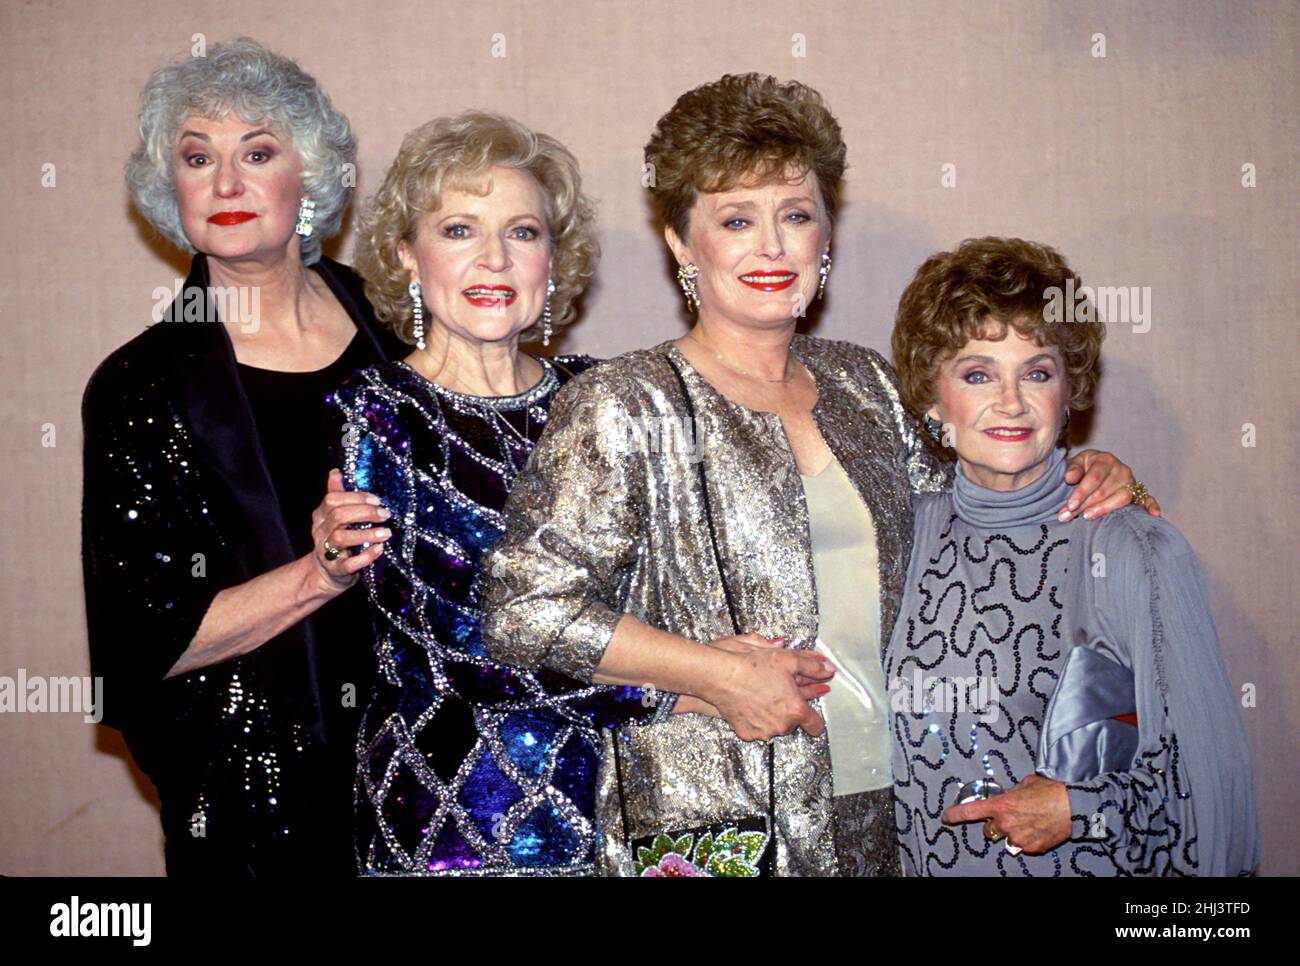 The Golden Girls, Estelle Getty, Rue Mclanahan, Betty White & Bea Arthur backstage at a Hollywood event  in 1991Credit: Ron Wolfson / Rock Negatives / MediaPunch Stock Photo